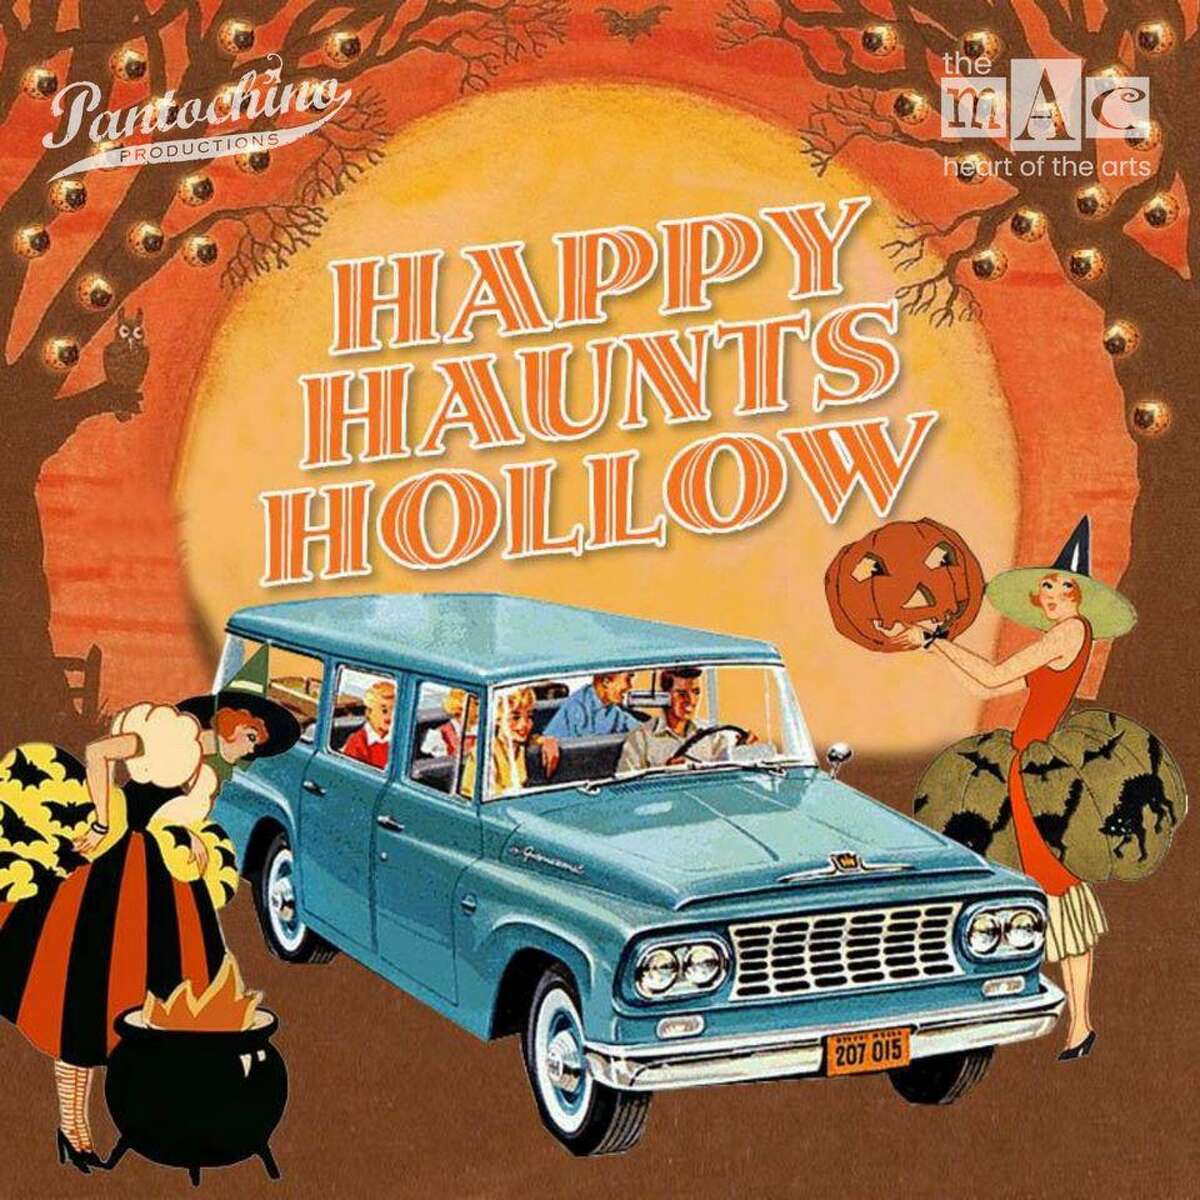 The Milford Arts Council and Pantochino Productions will present Happy Haunts Hollow, a drive-through Halloween experience for families Oct. 22-25, from 6-9 p.m., at Eisenhower Park, 780 North St., Milford.